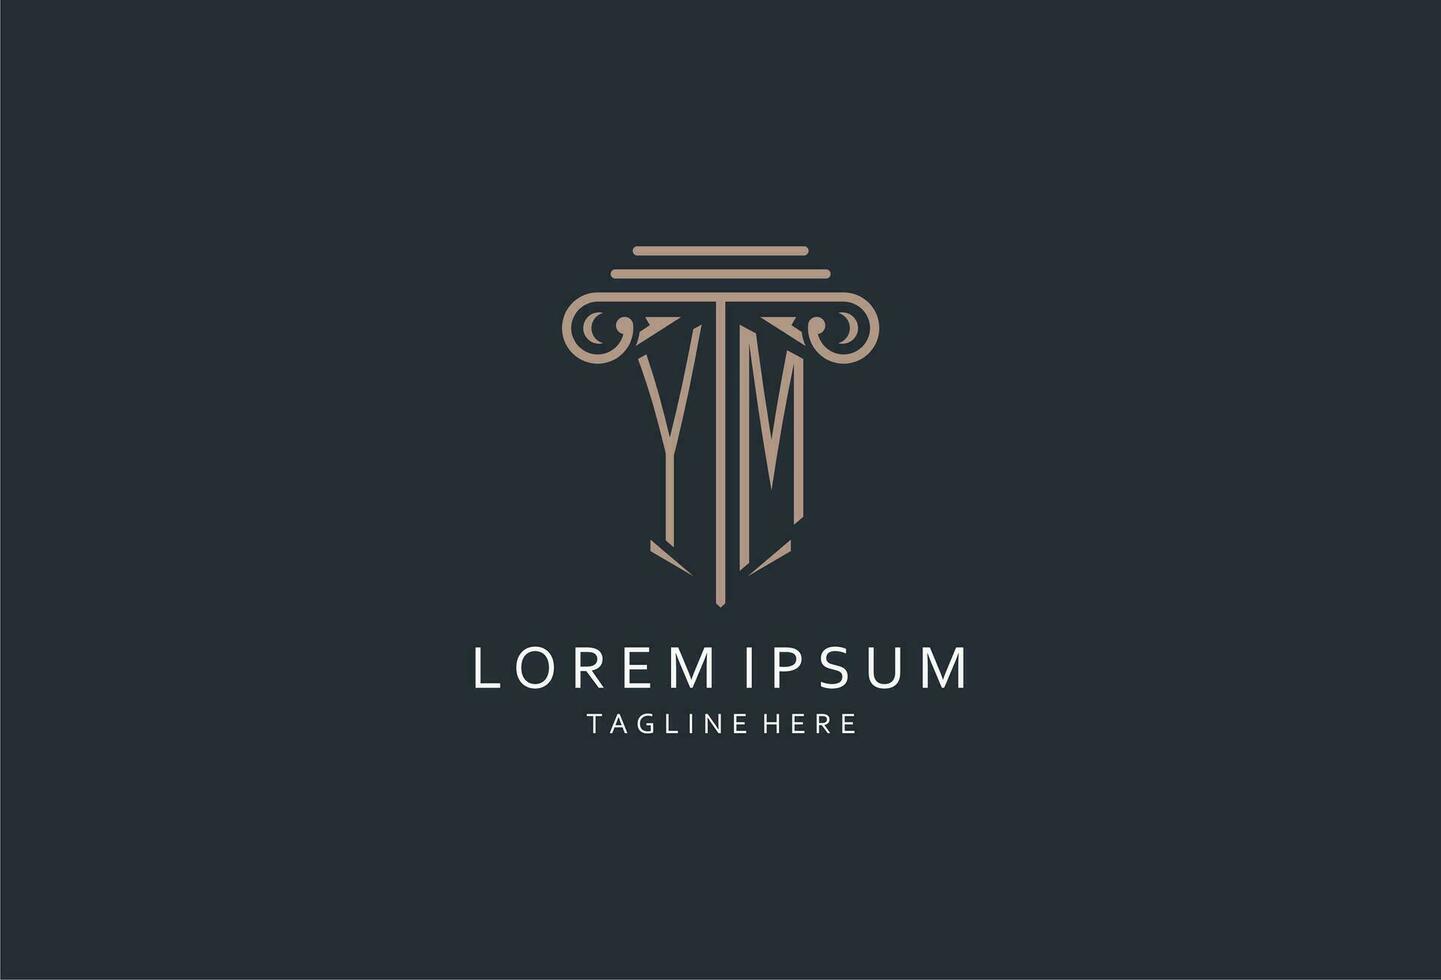 YM monogram logo with pillar shape icon, luxury and elegant design logo for law firm initial style logo vector